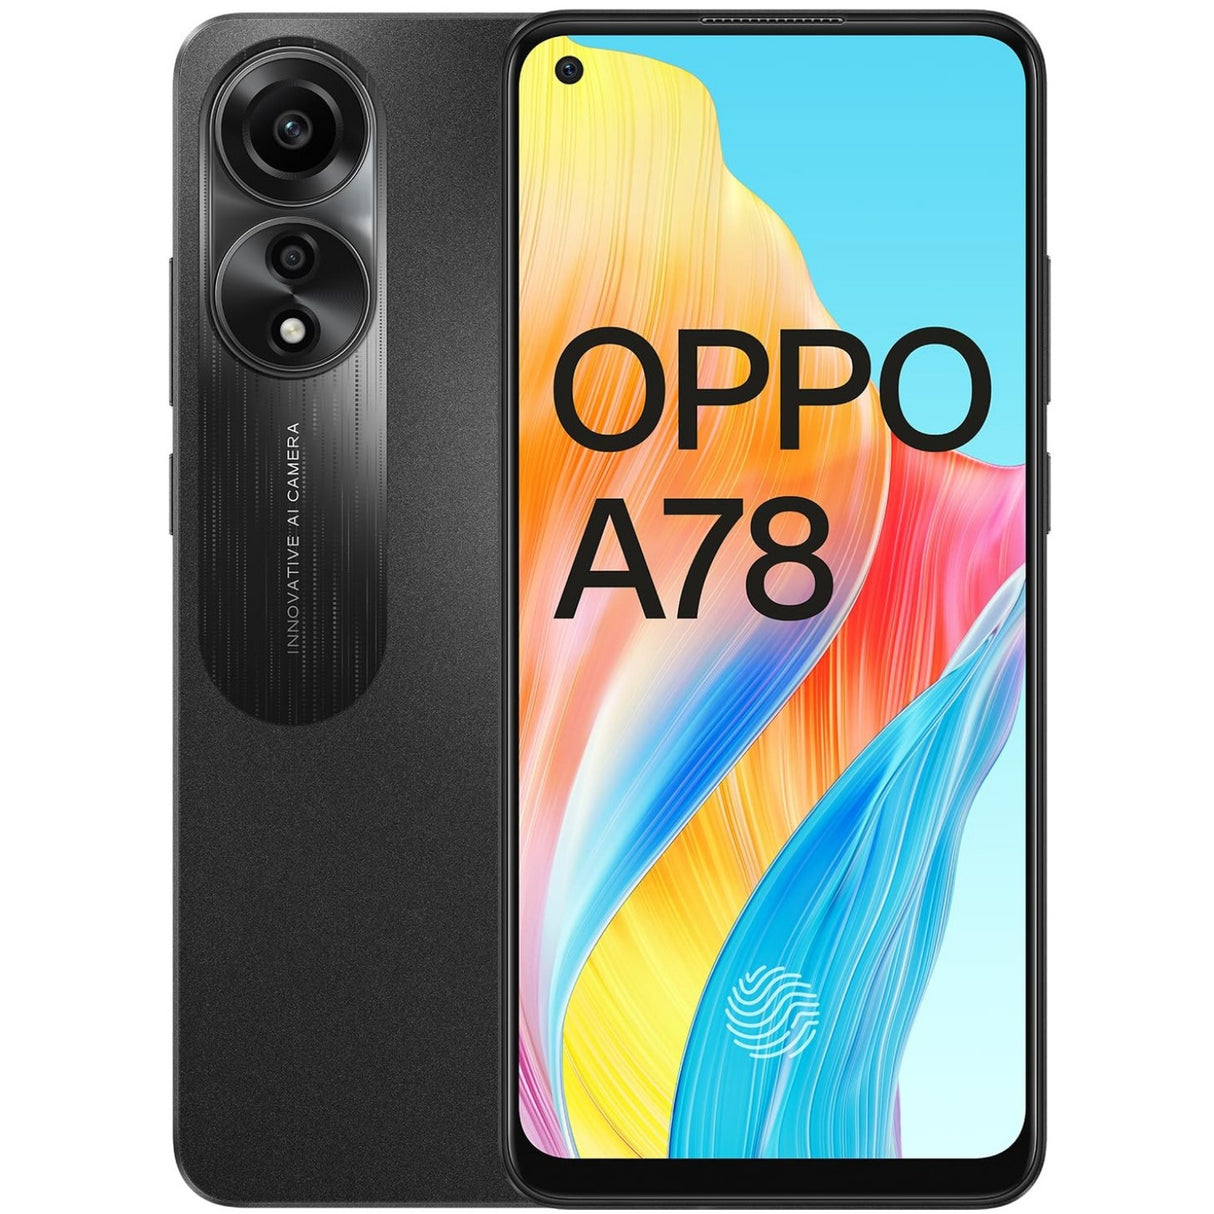 Oppo A78: Mist Black, 8GB RAM, 128GB Storage - Elevate your Android experience.